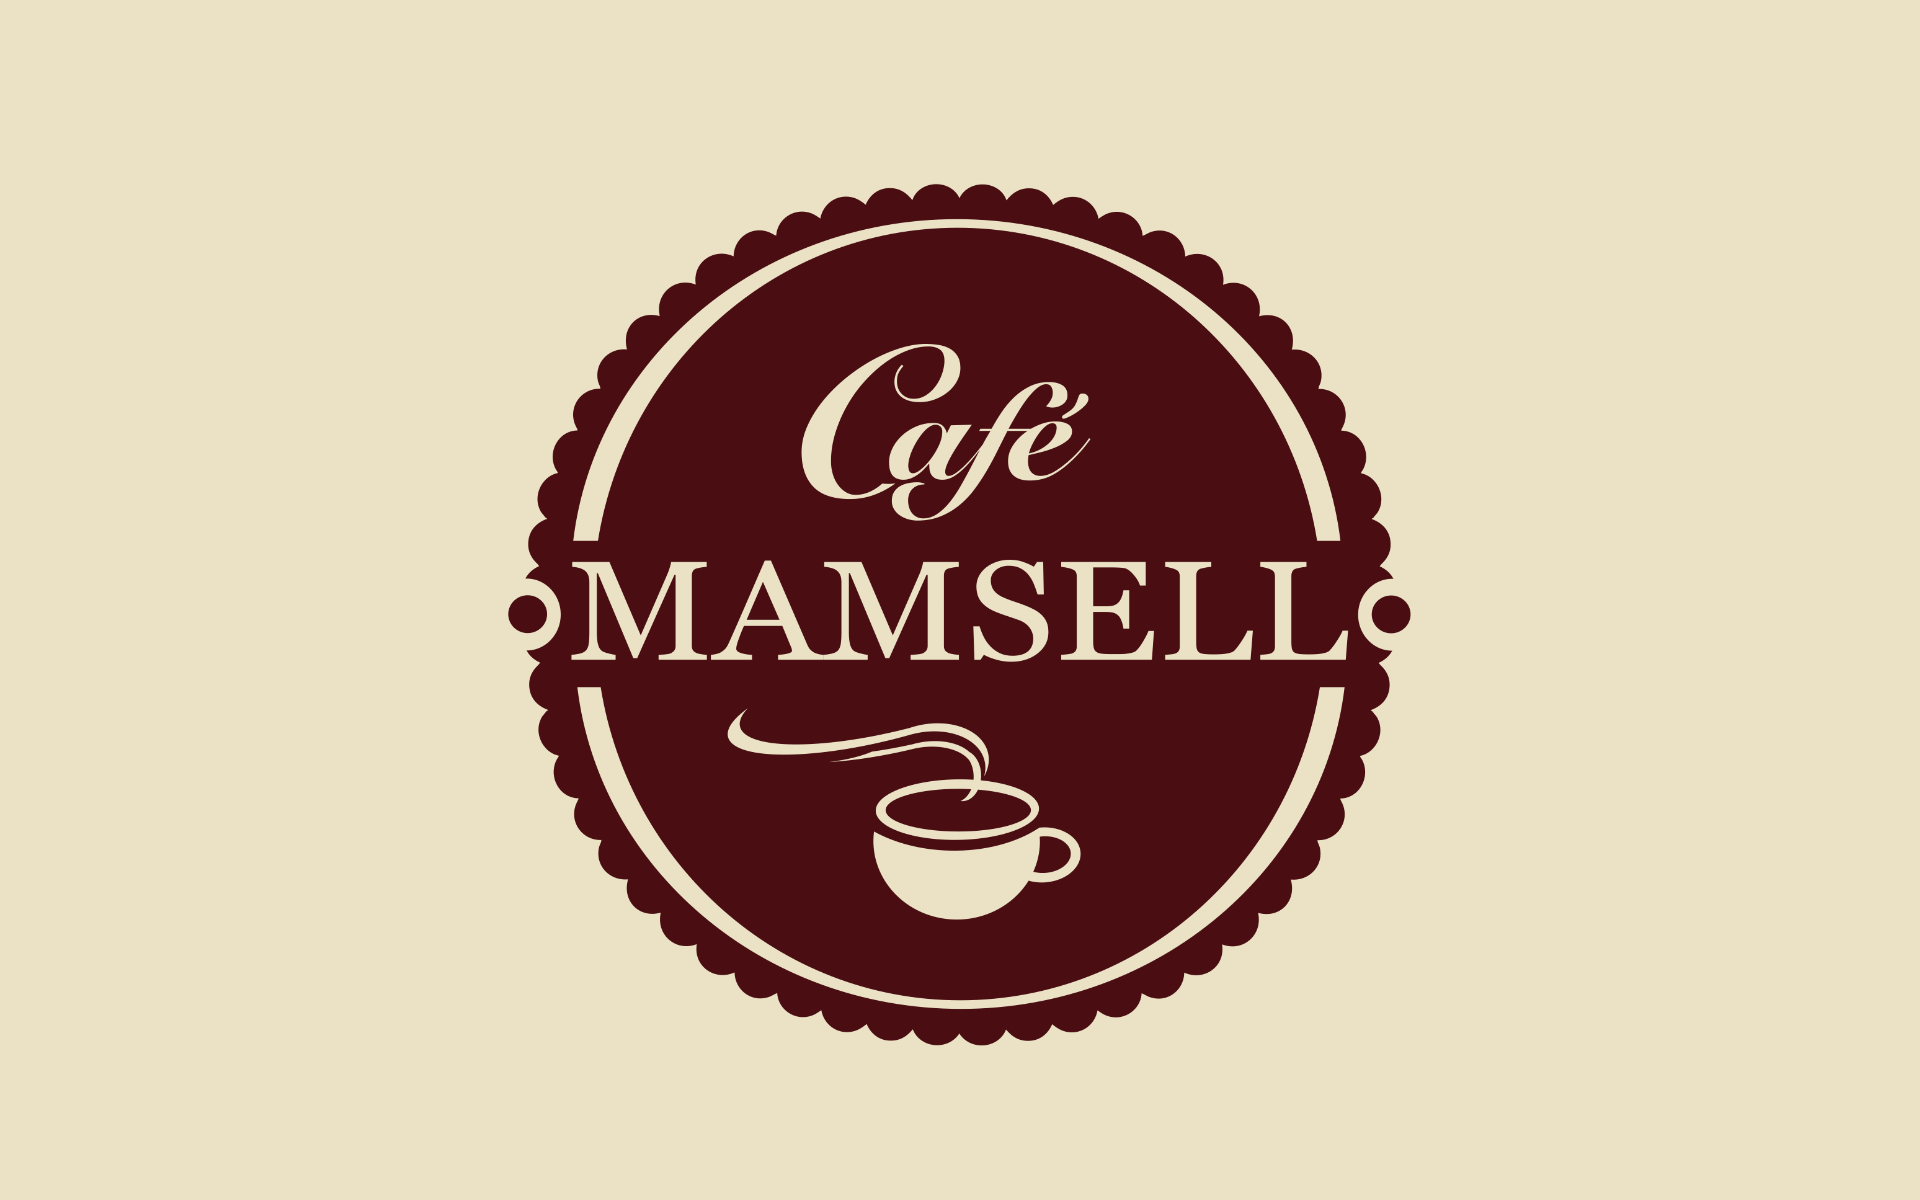 Cafe_Mamsell_CD